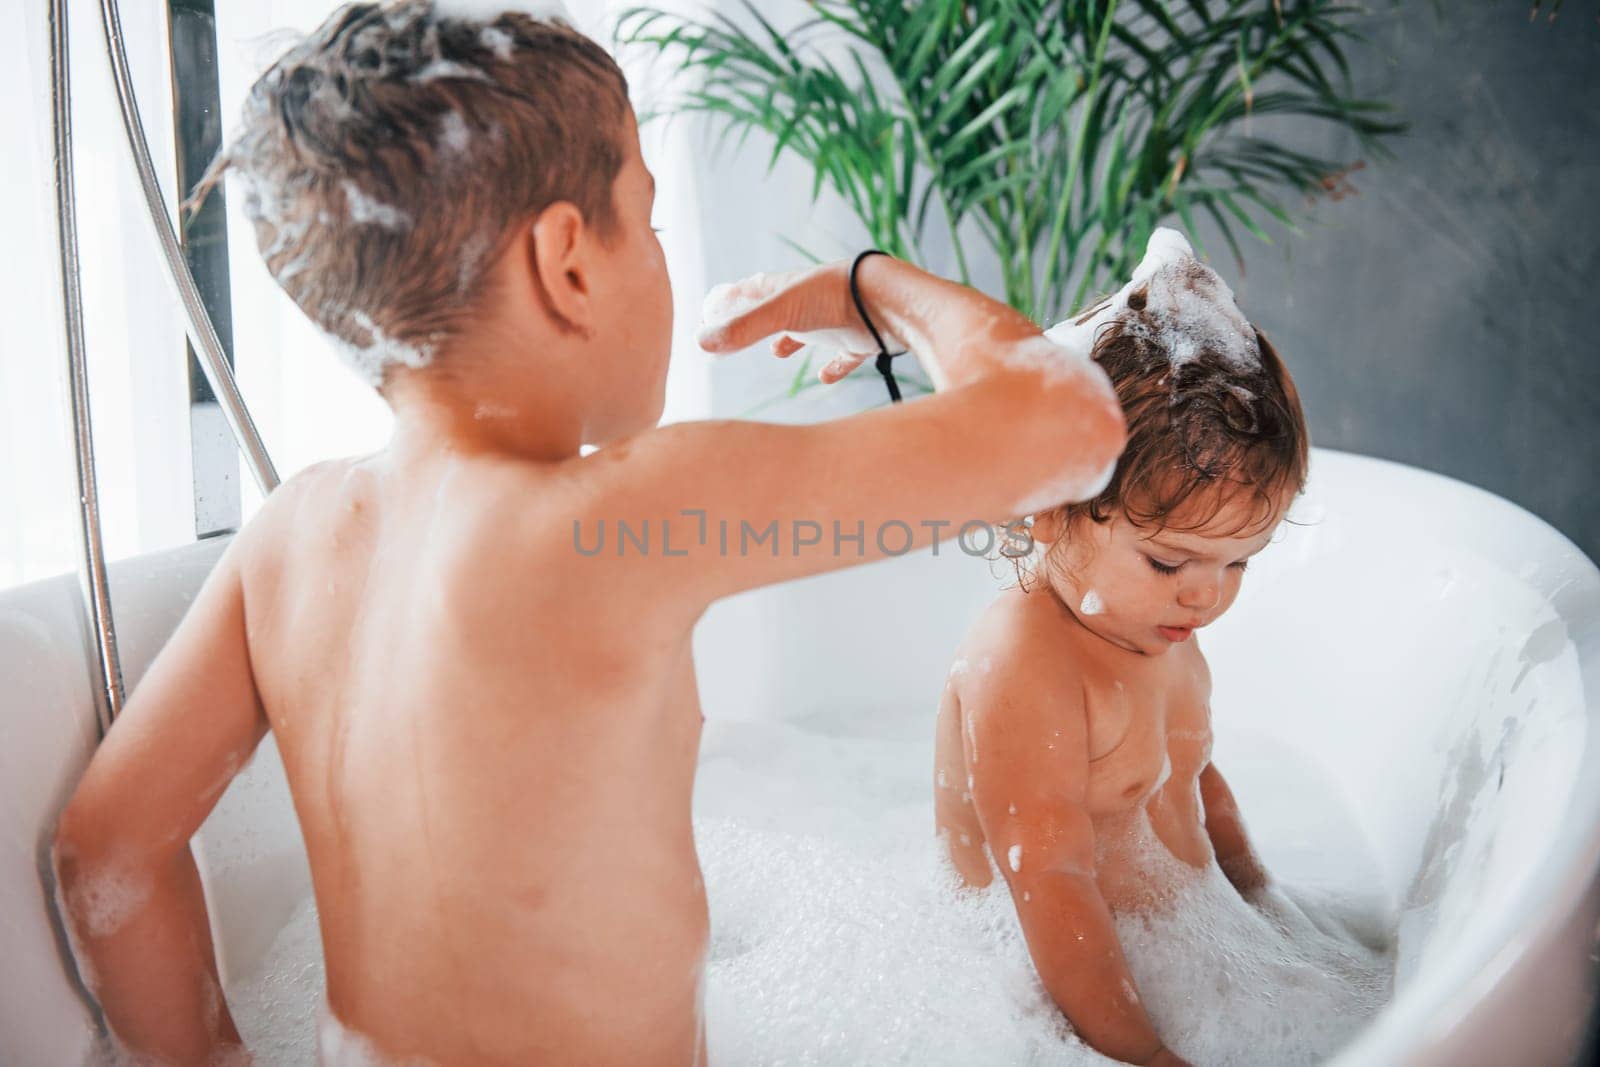 Two kids having fun and washing themselves in the bath at home by Standret